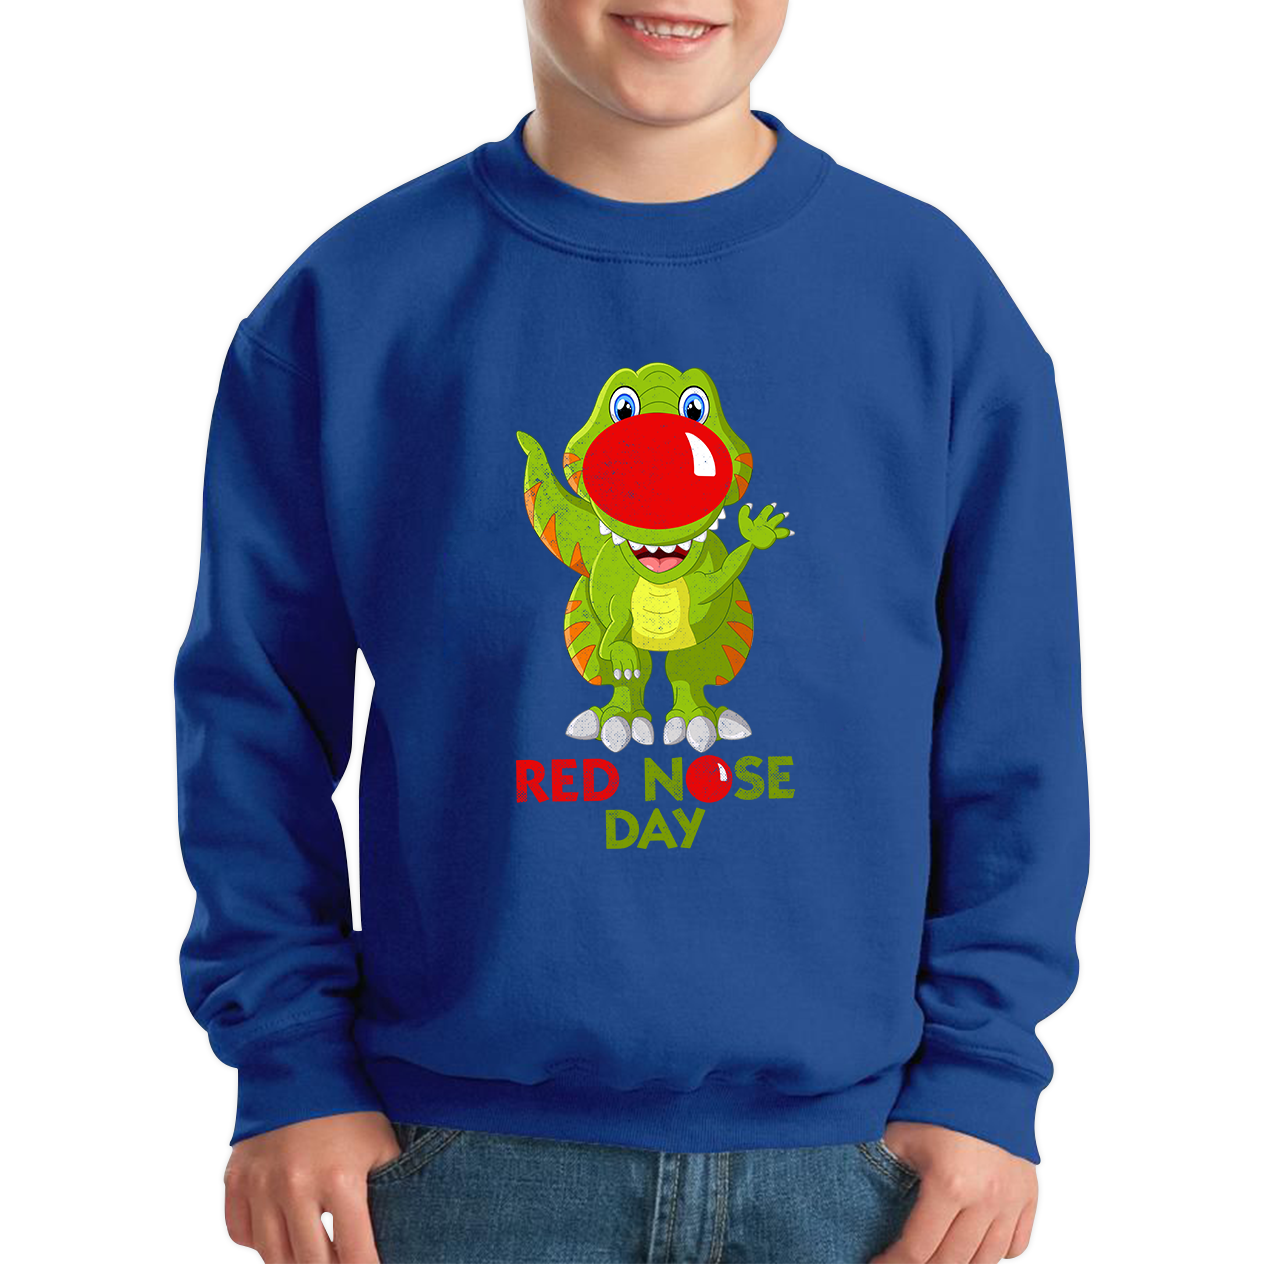 Funny Dinosaur Red Nose Day Kids Sweatshirt. 50% Goes To Charity